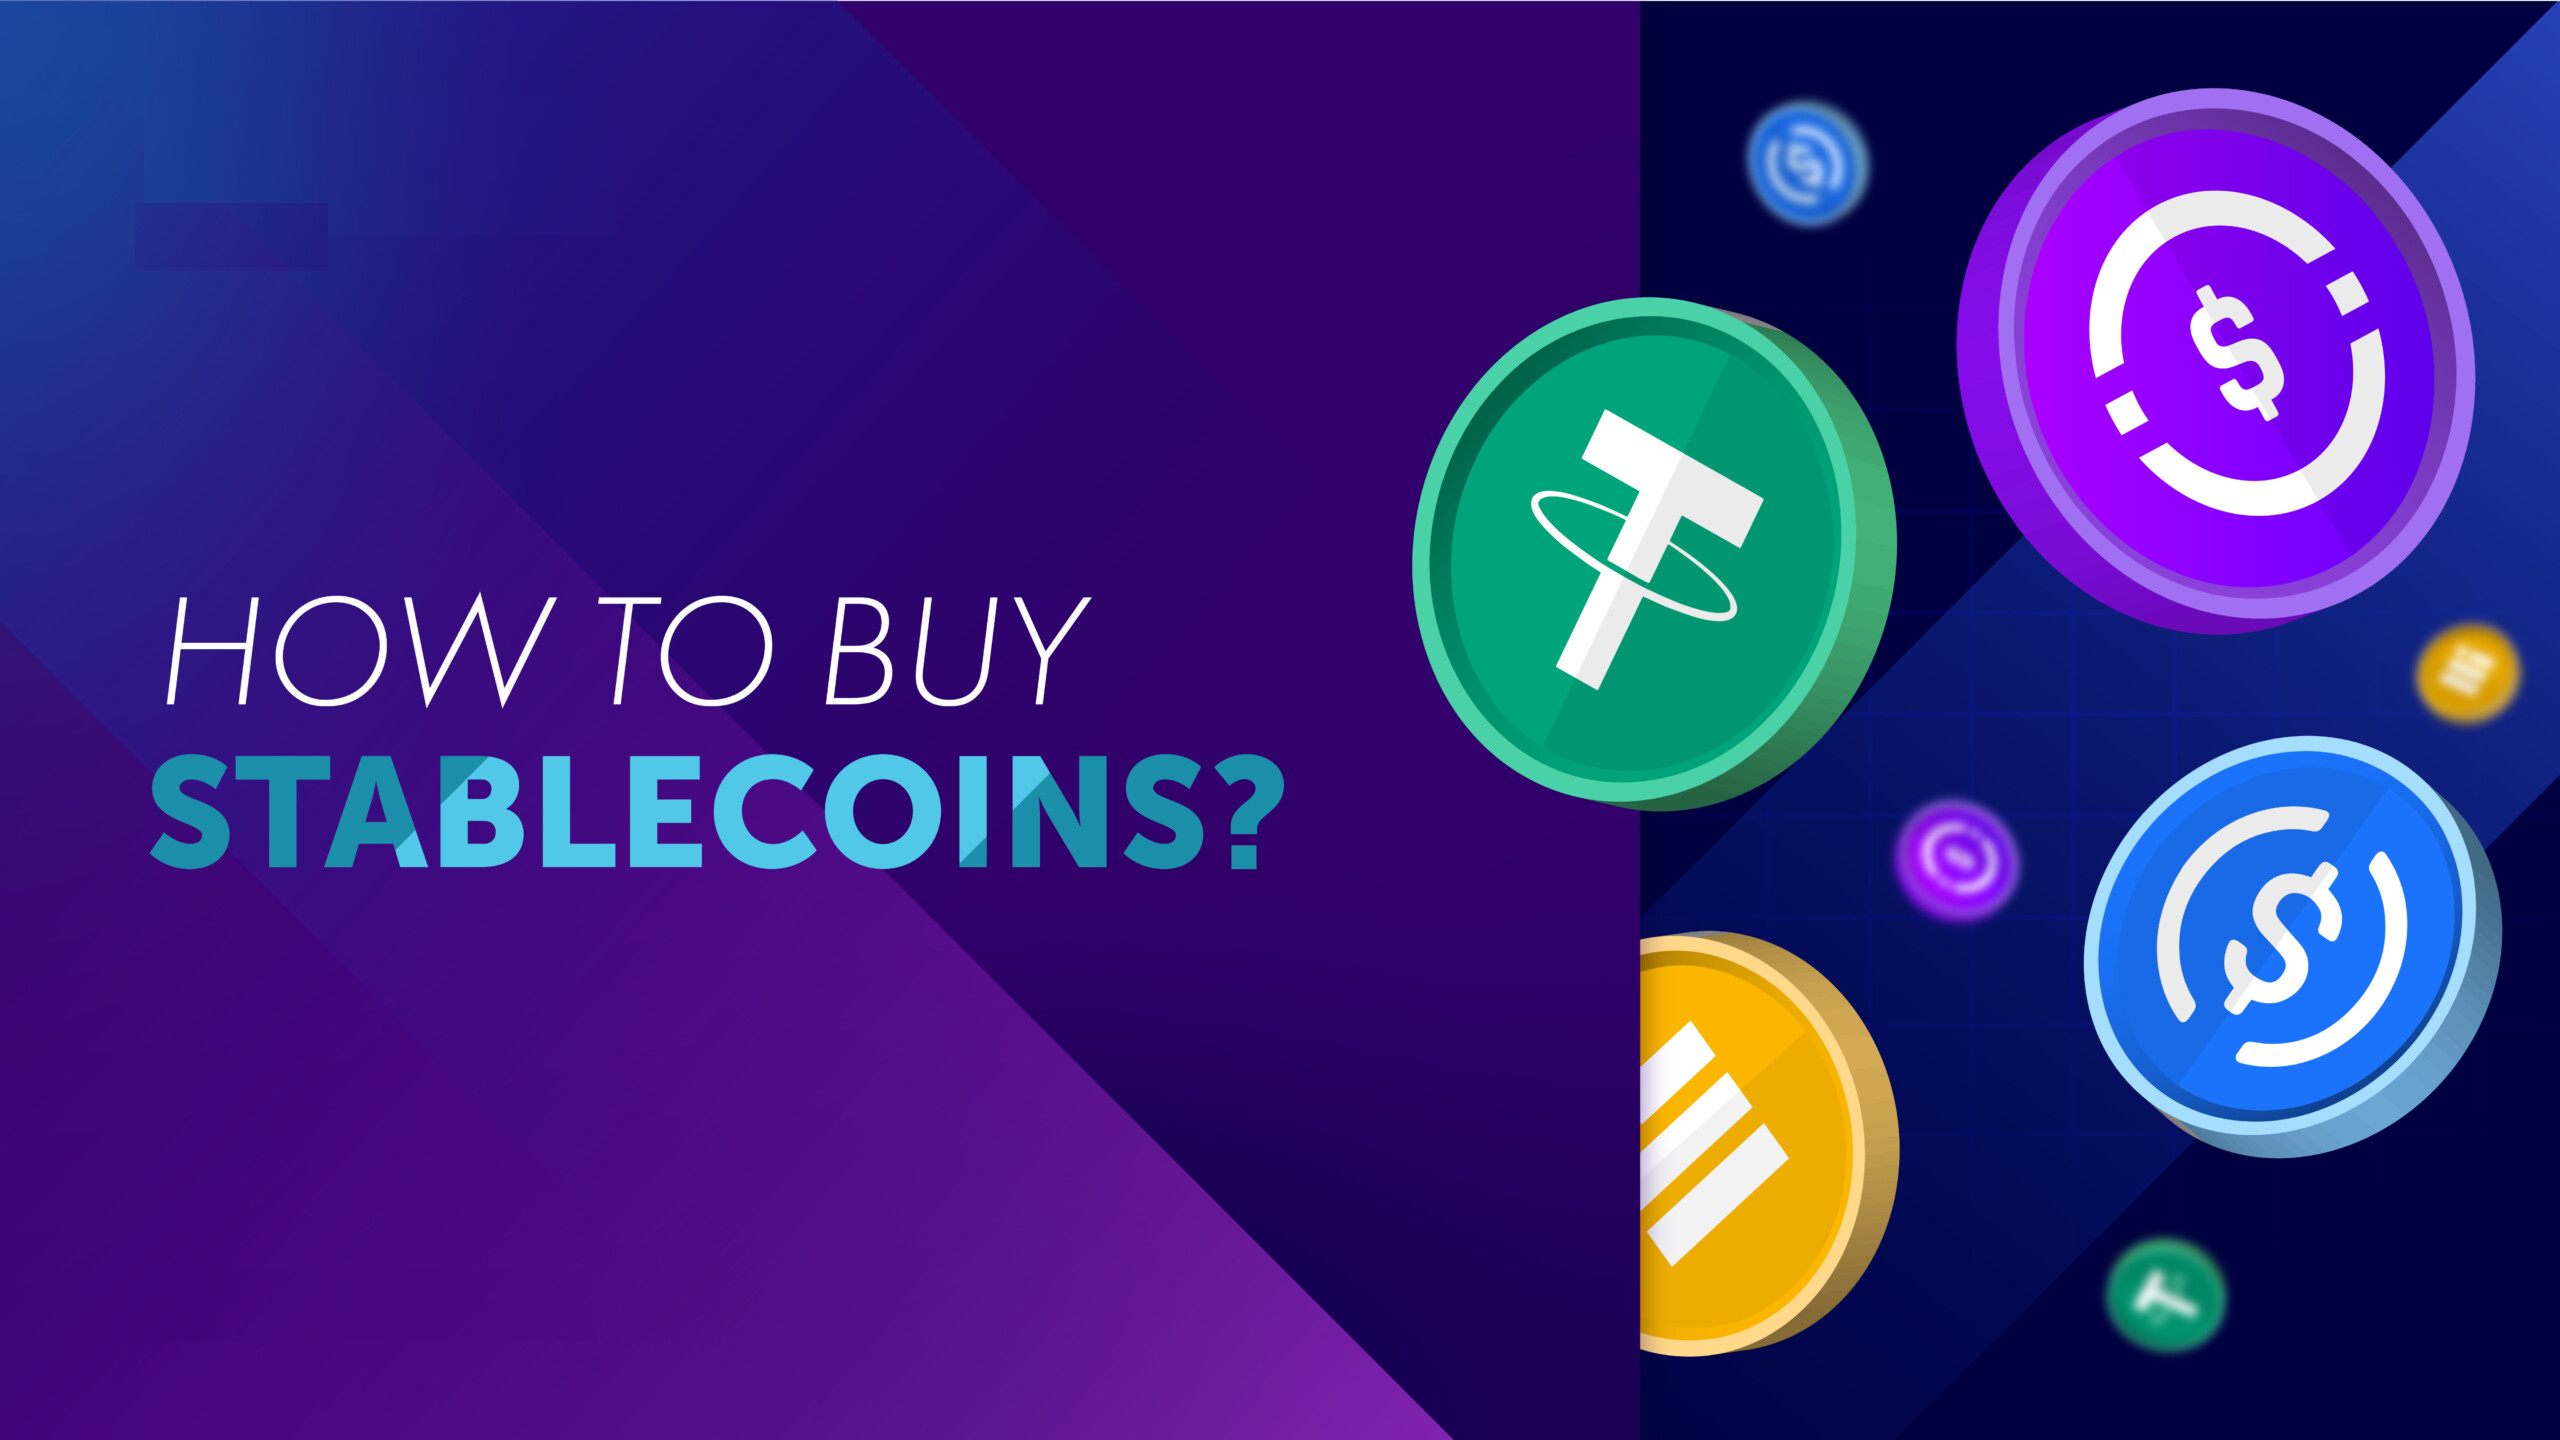 'how to buy stablecoins' written